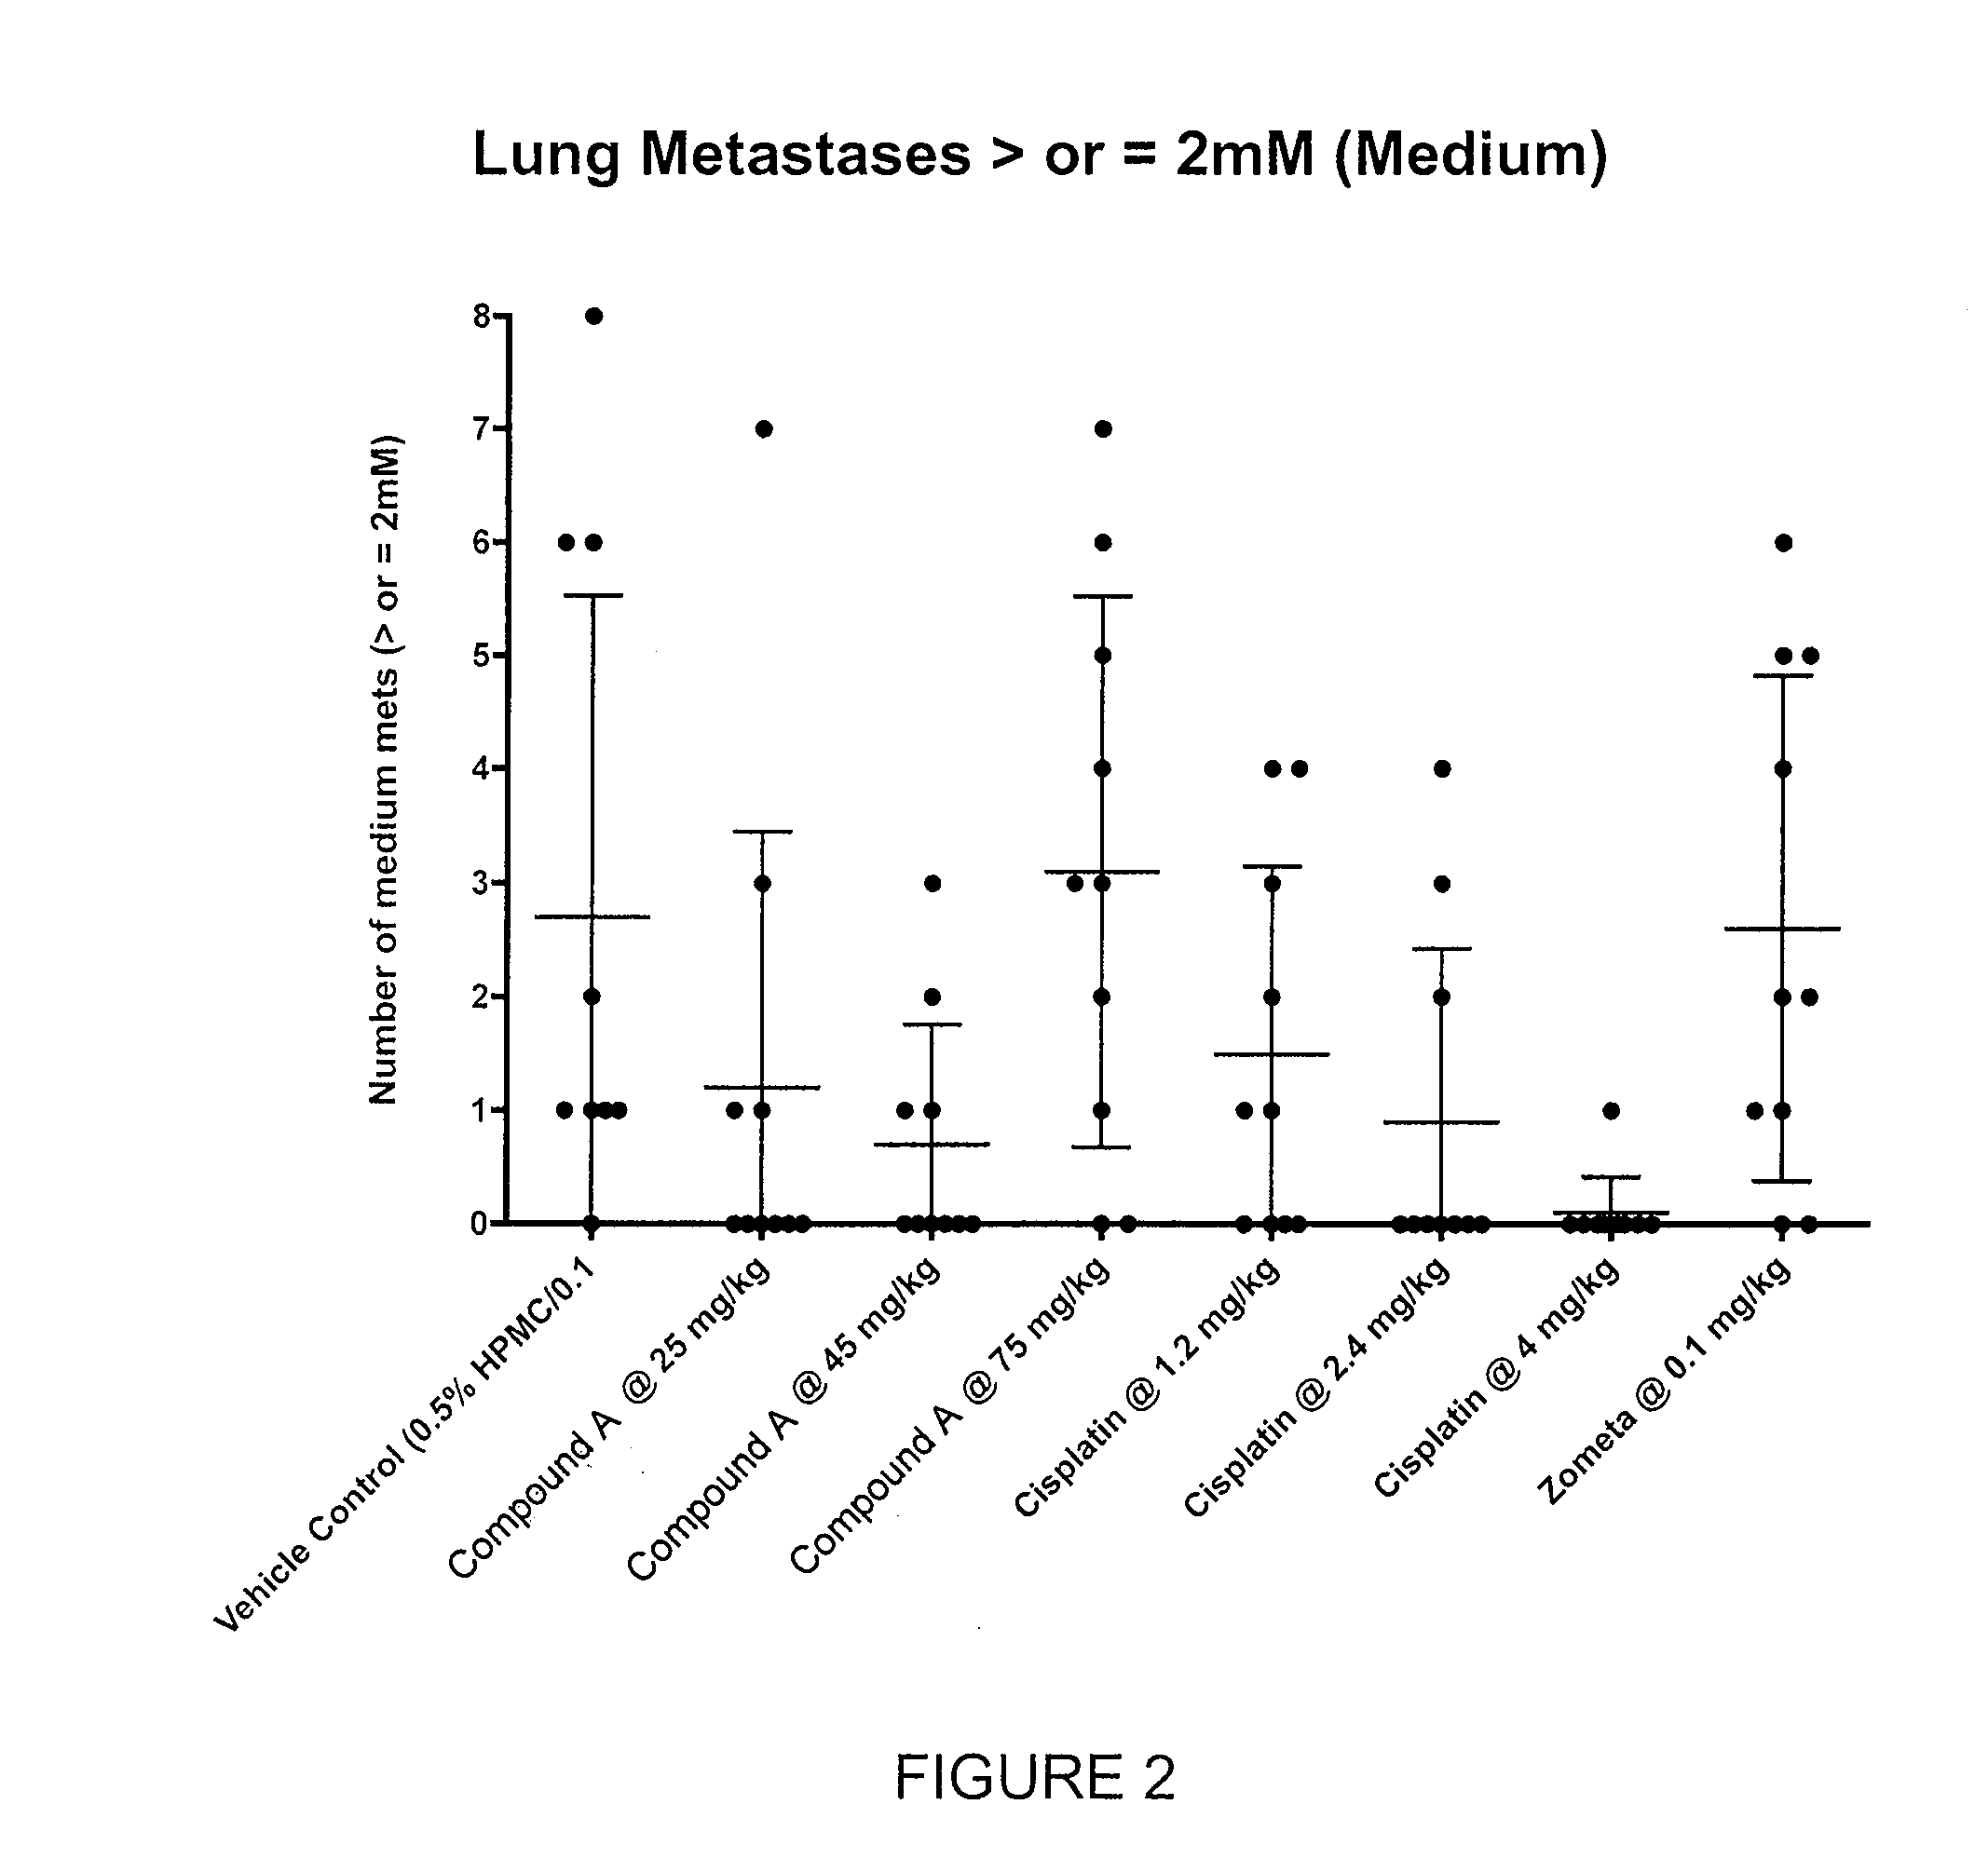 Axl inhibitors for use in combination therapy for preventing, treating or managing metastatic cancer